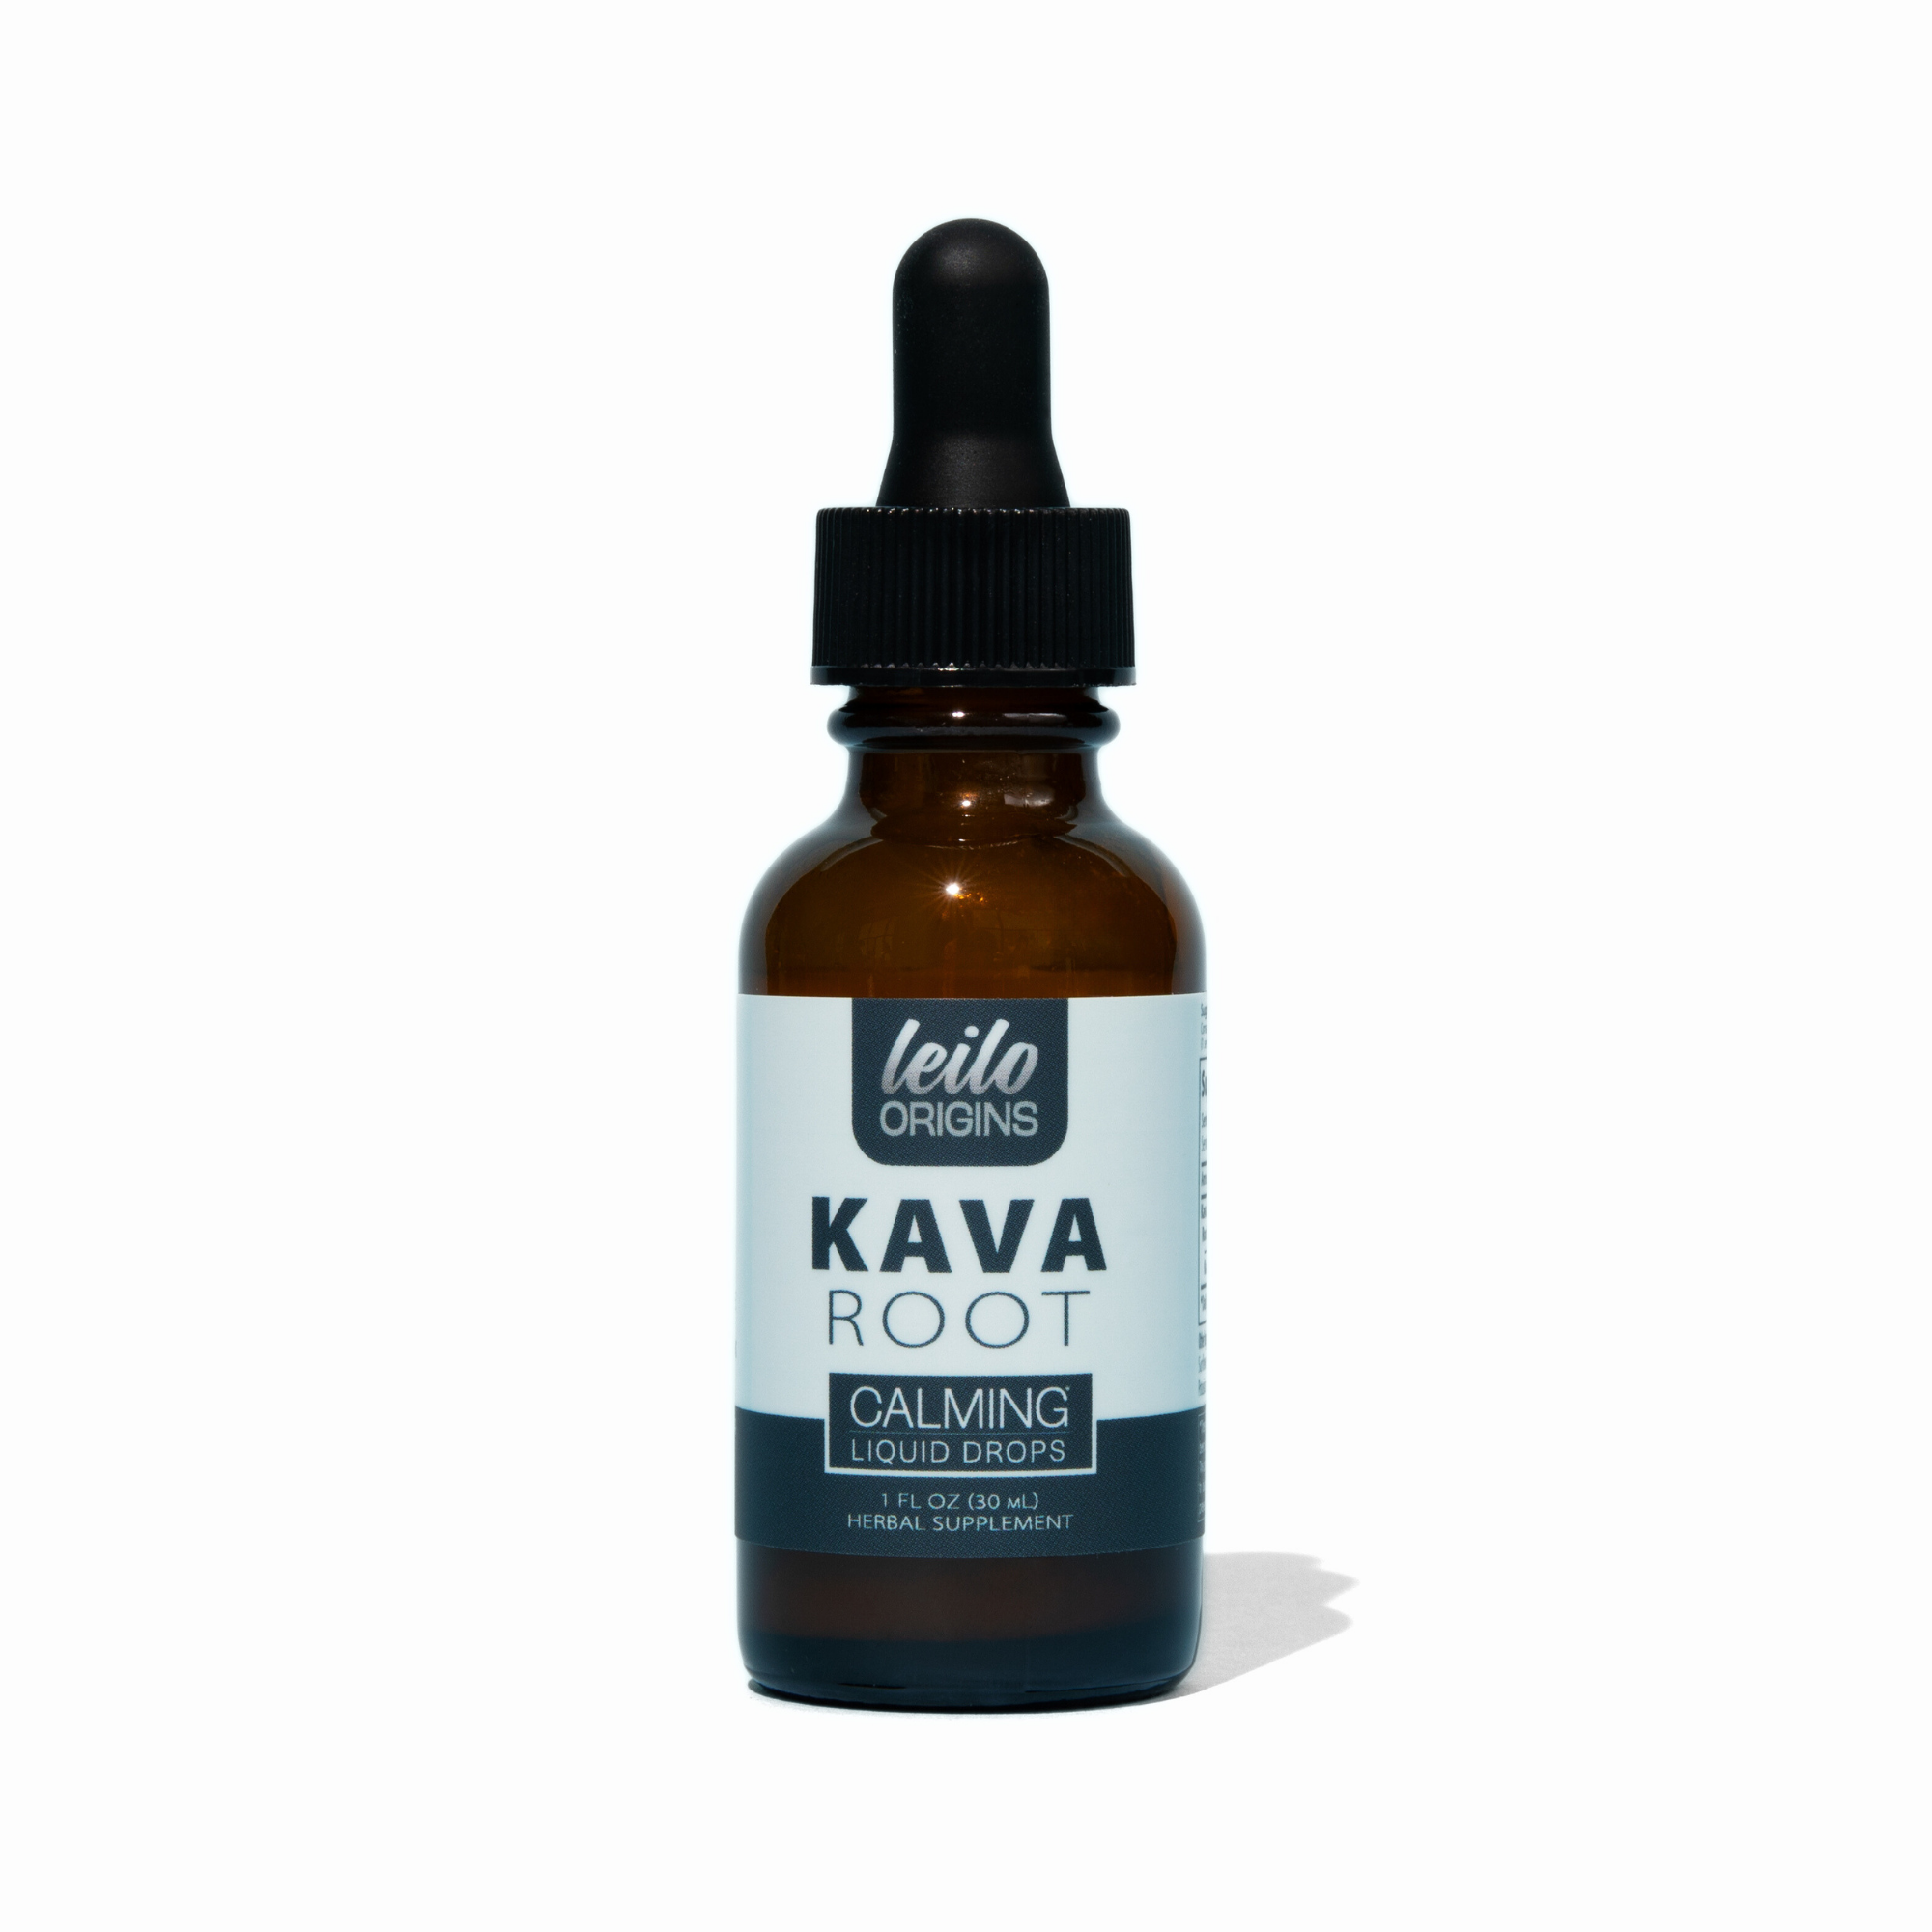 Bottle of Kava root herbal supplement with dropper on a white background.